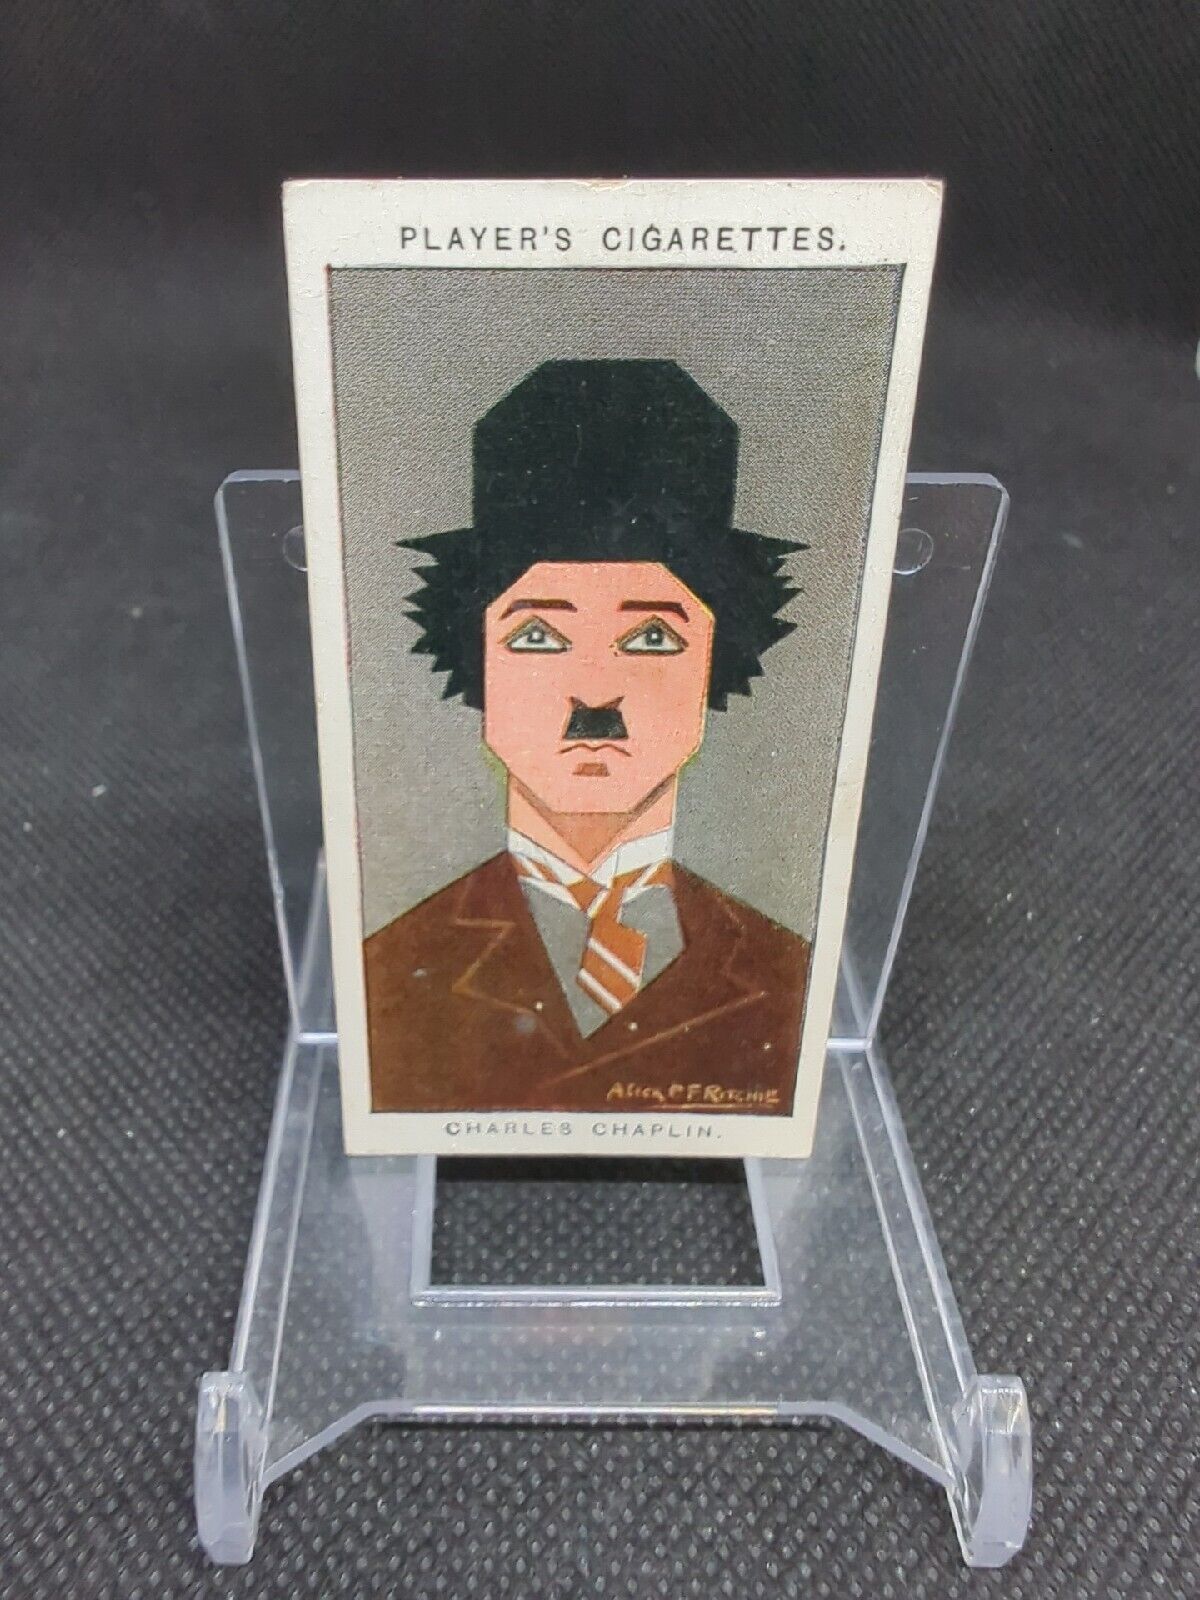 1926 John Player Sons Cigarette Cards Straight Line Caricatures Charlie Chaplin